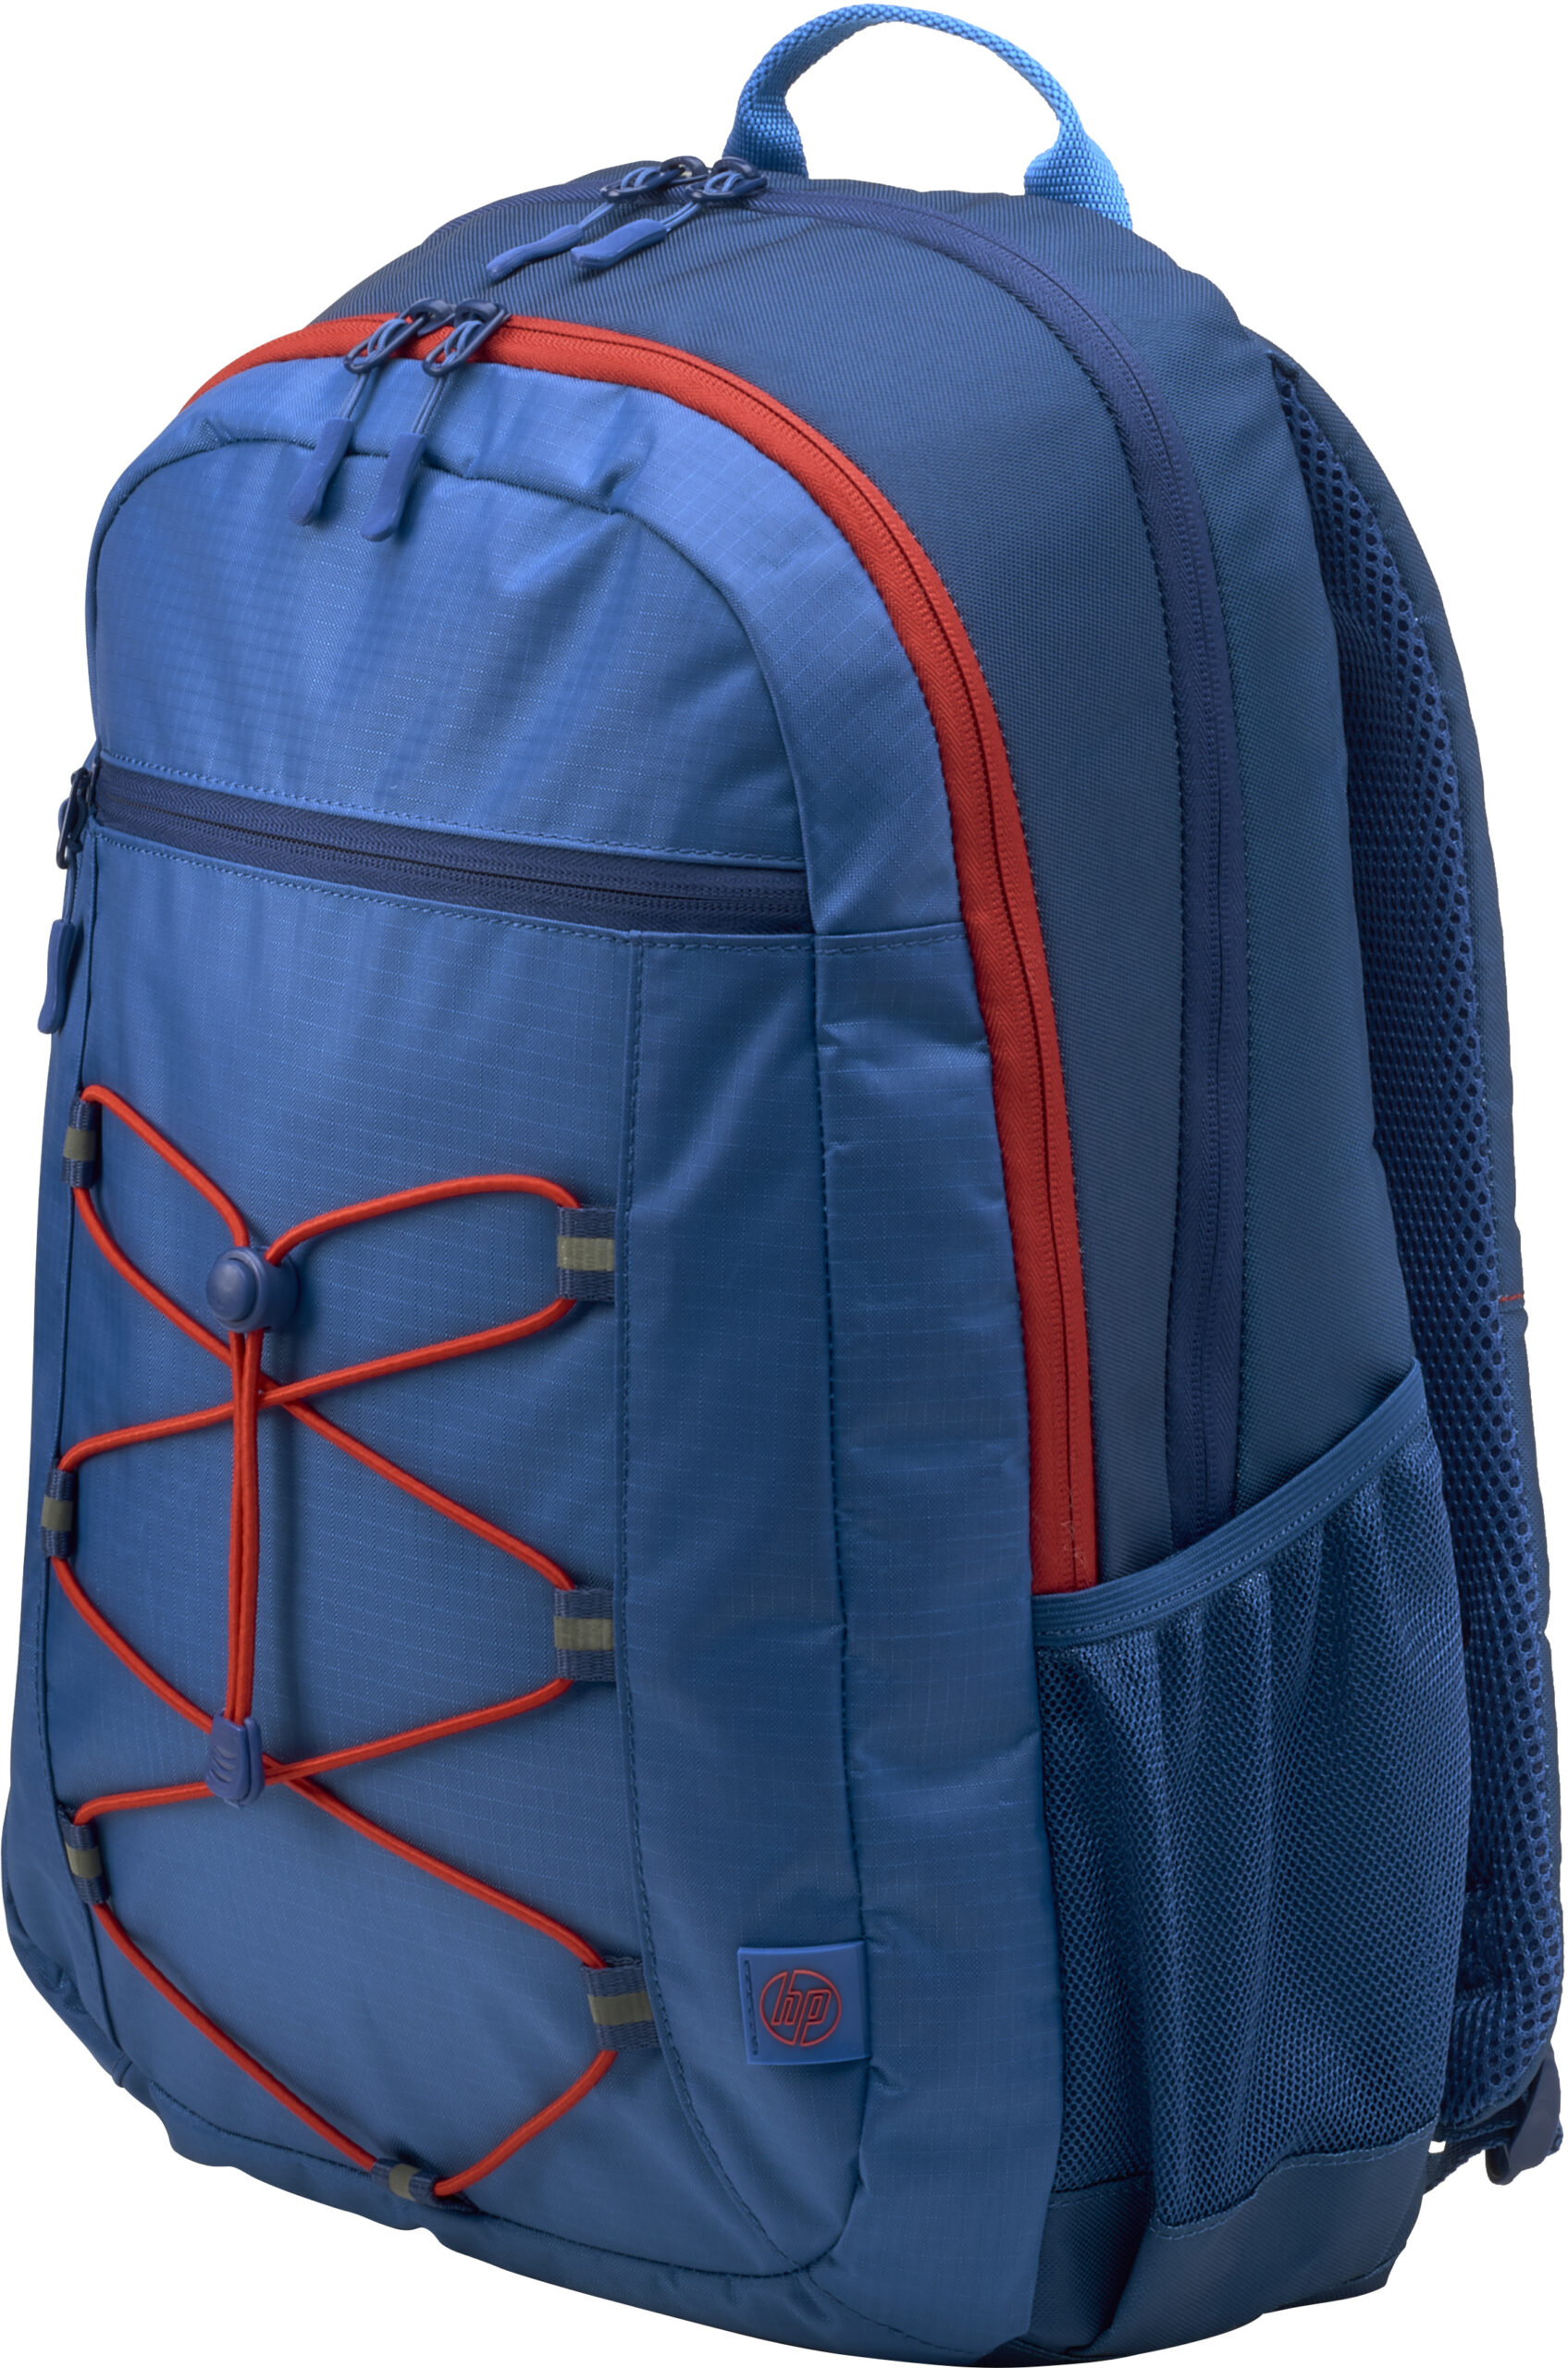 15 6 Active Blue Red Backpack Hp Cons Accs 9g 1mr61aa Abb 190781636854